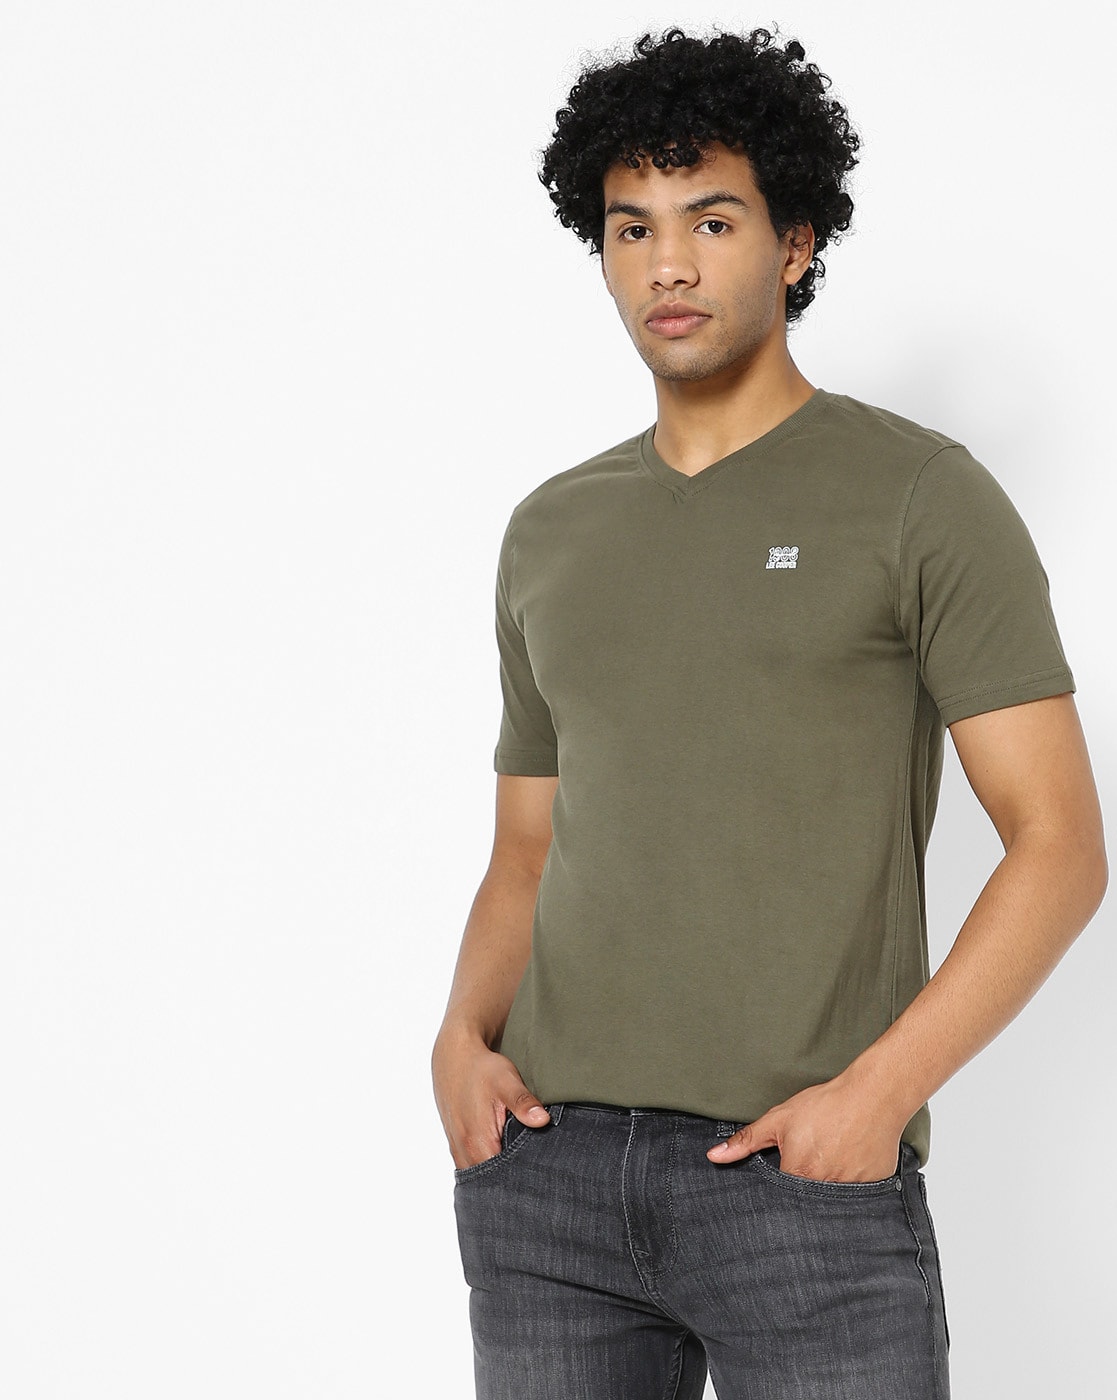 Casual Olive Green Solid Shirt - Over